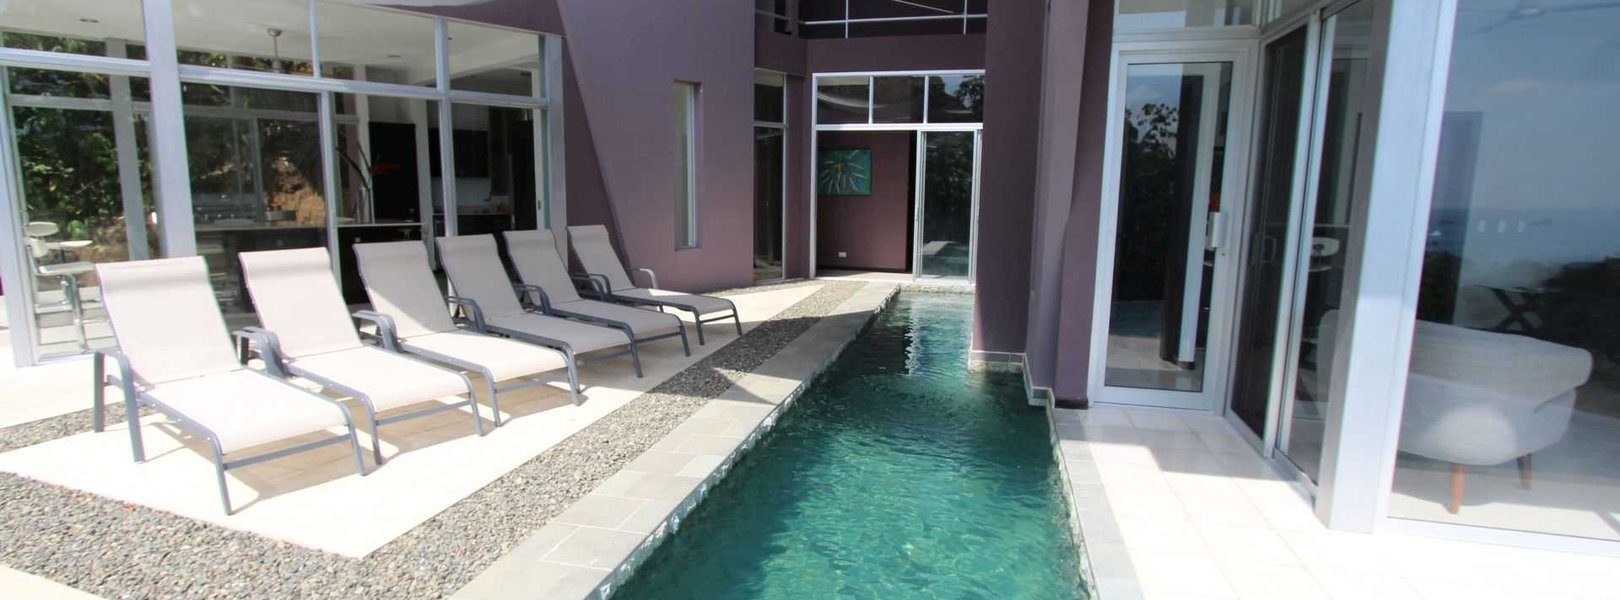 This modern vacation rental in Manuel Antonio features an infinity pool that partly cuts through the villa.